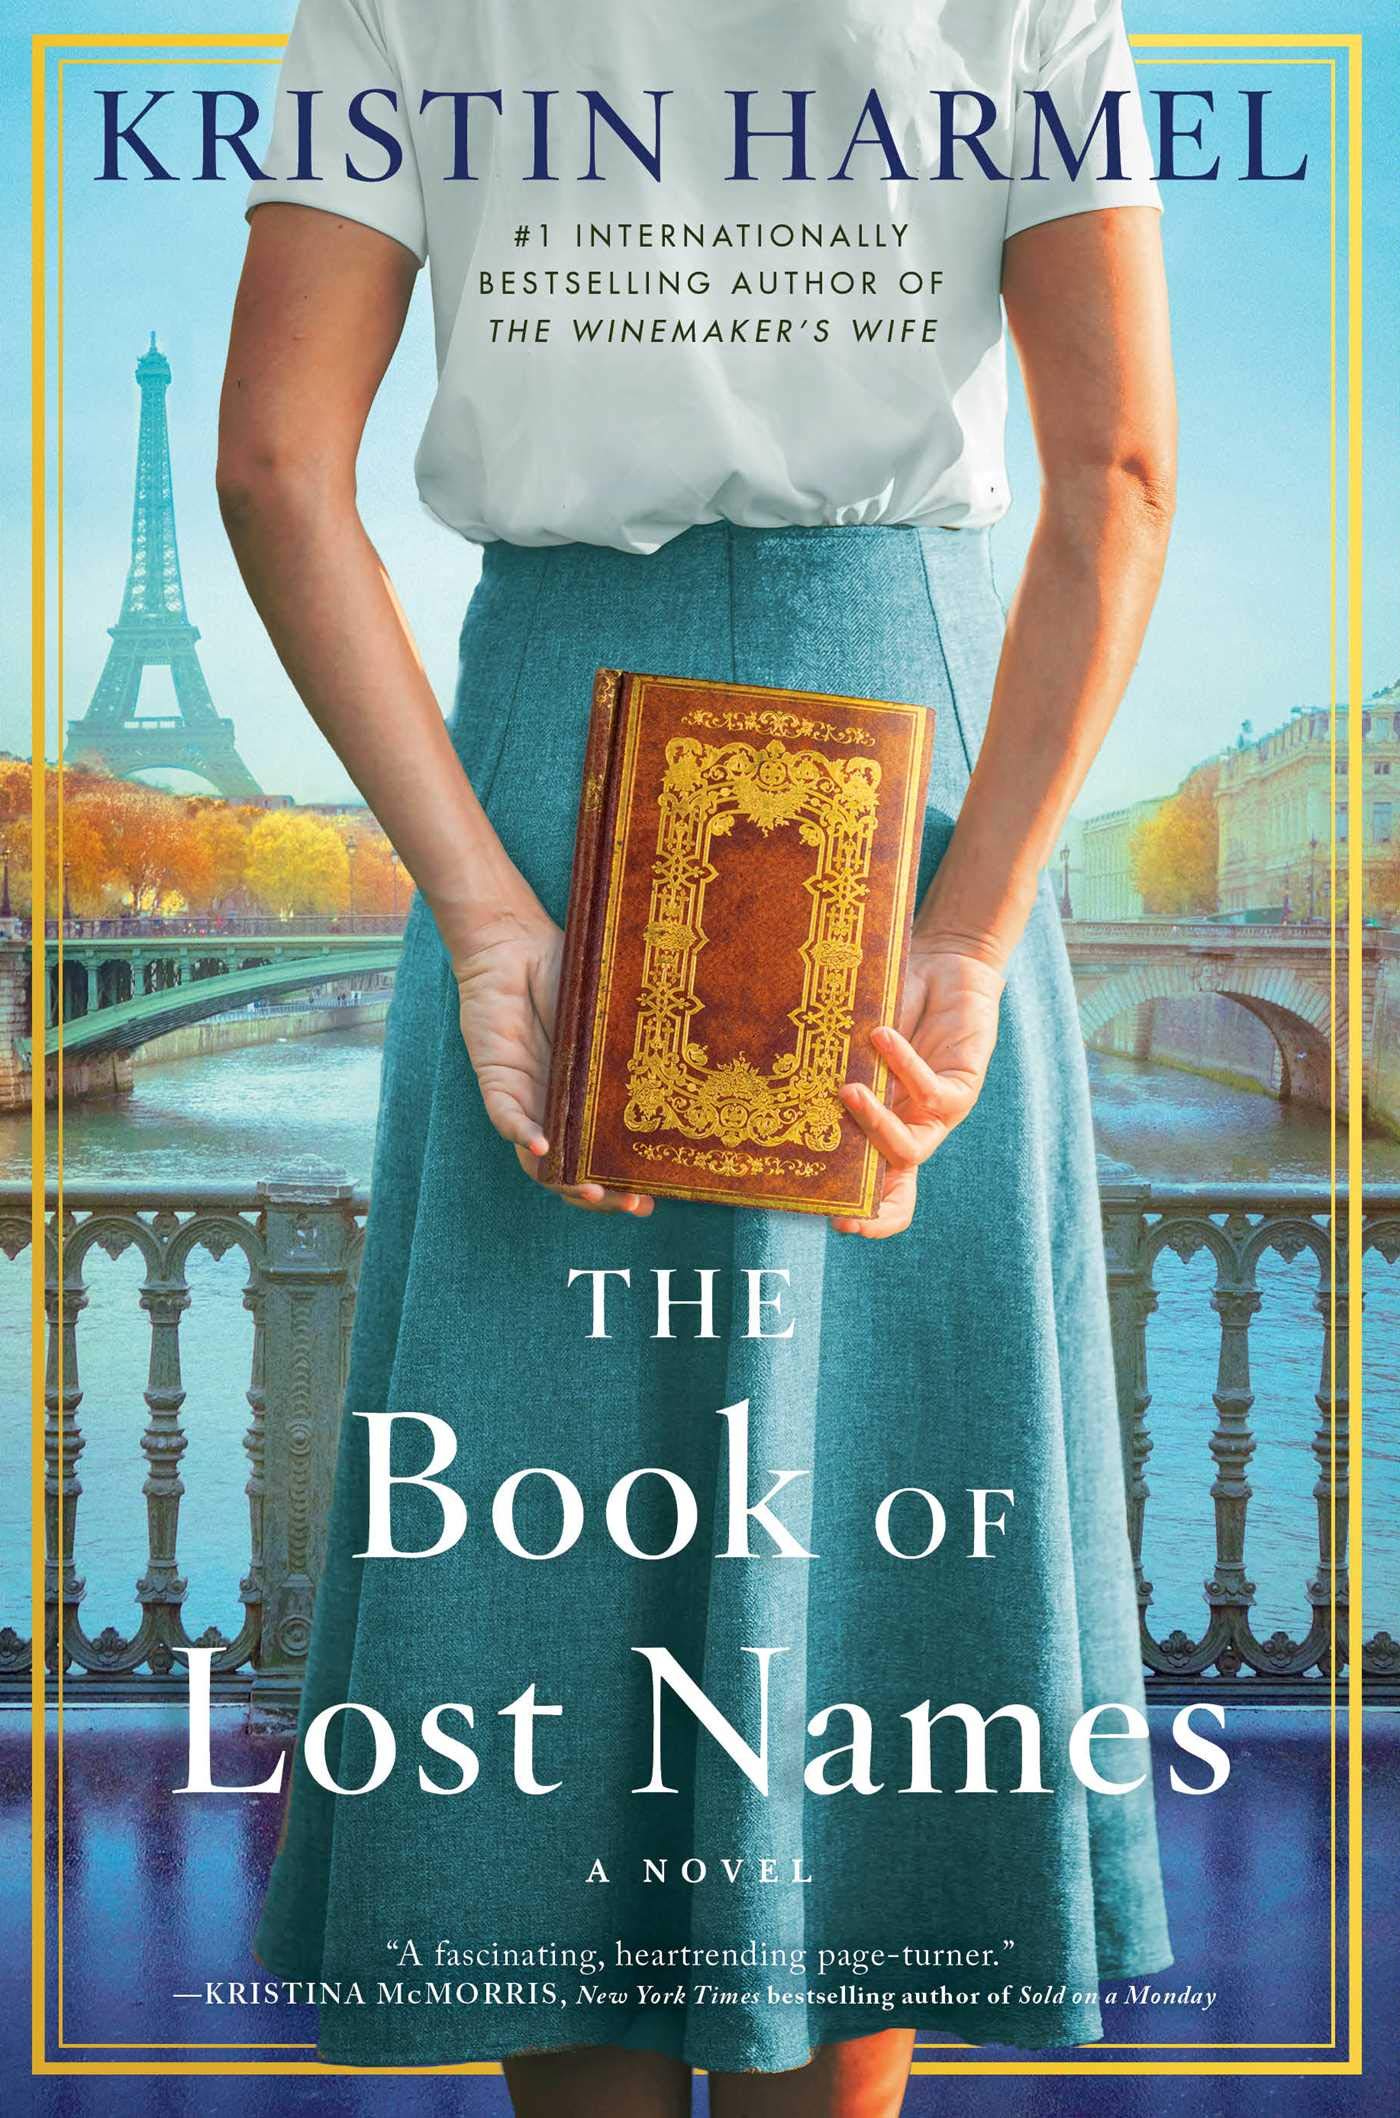 Book cover of "The Book of Lost Names," by Kristin Harmel